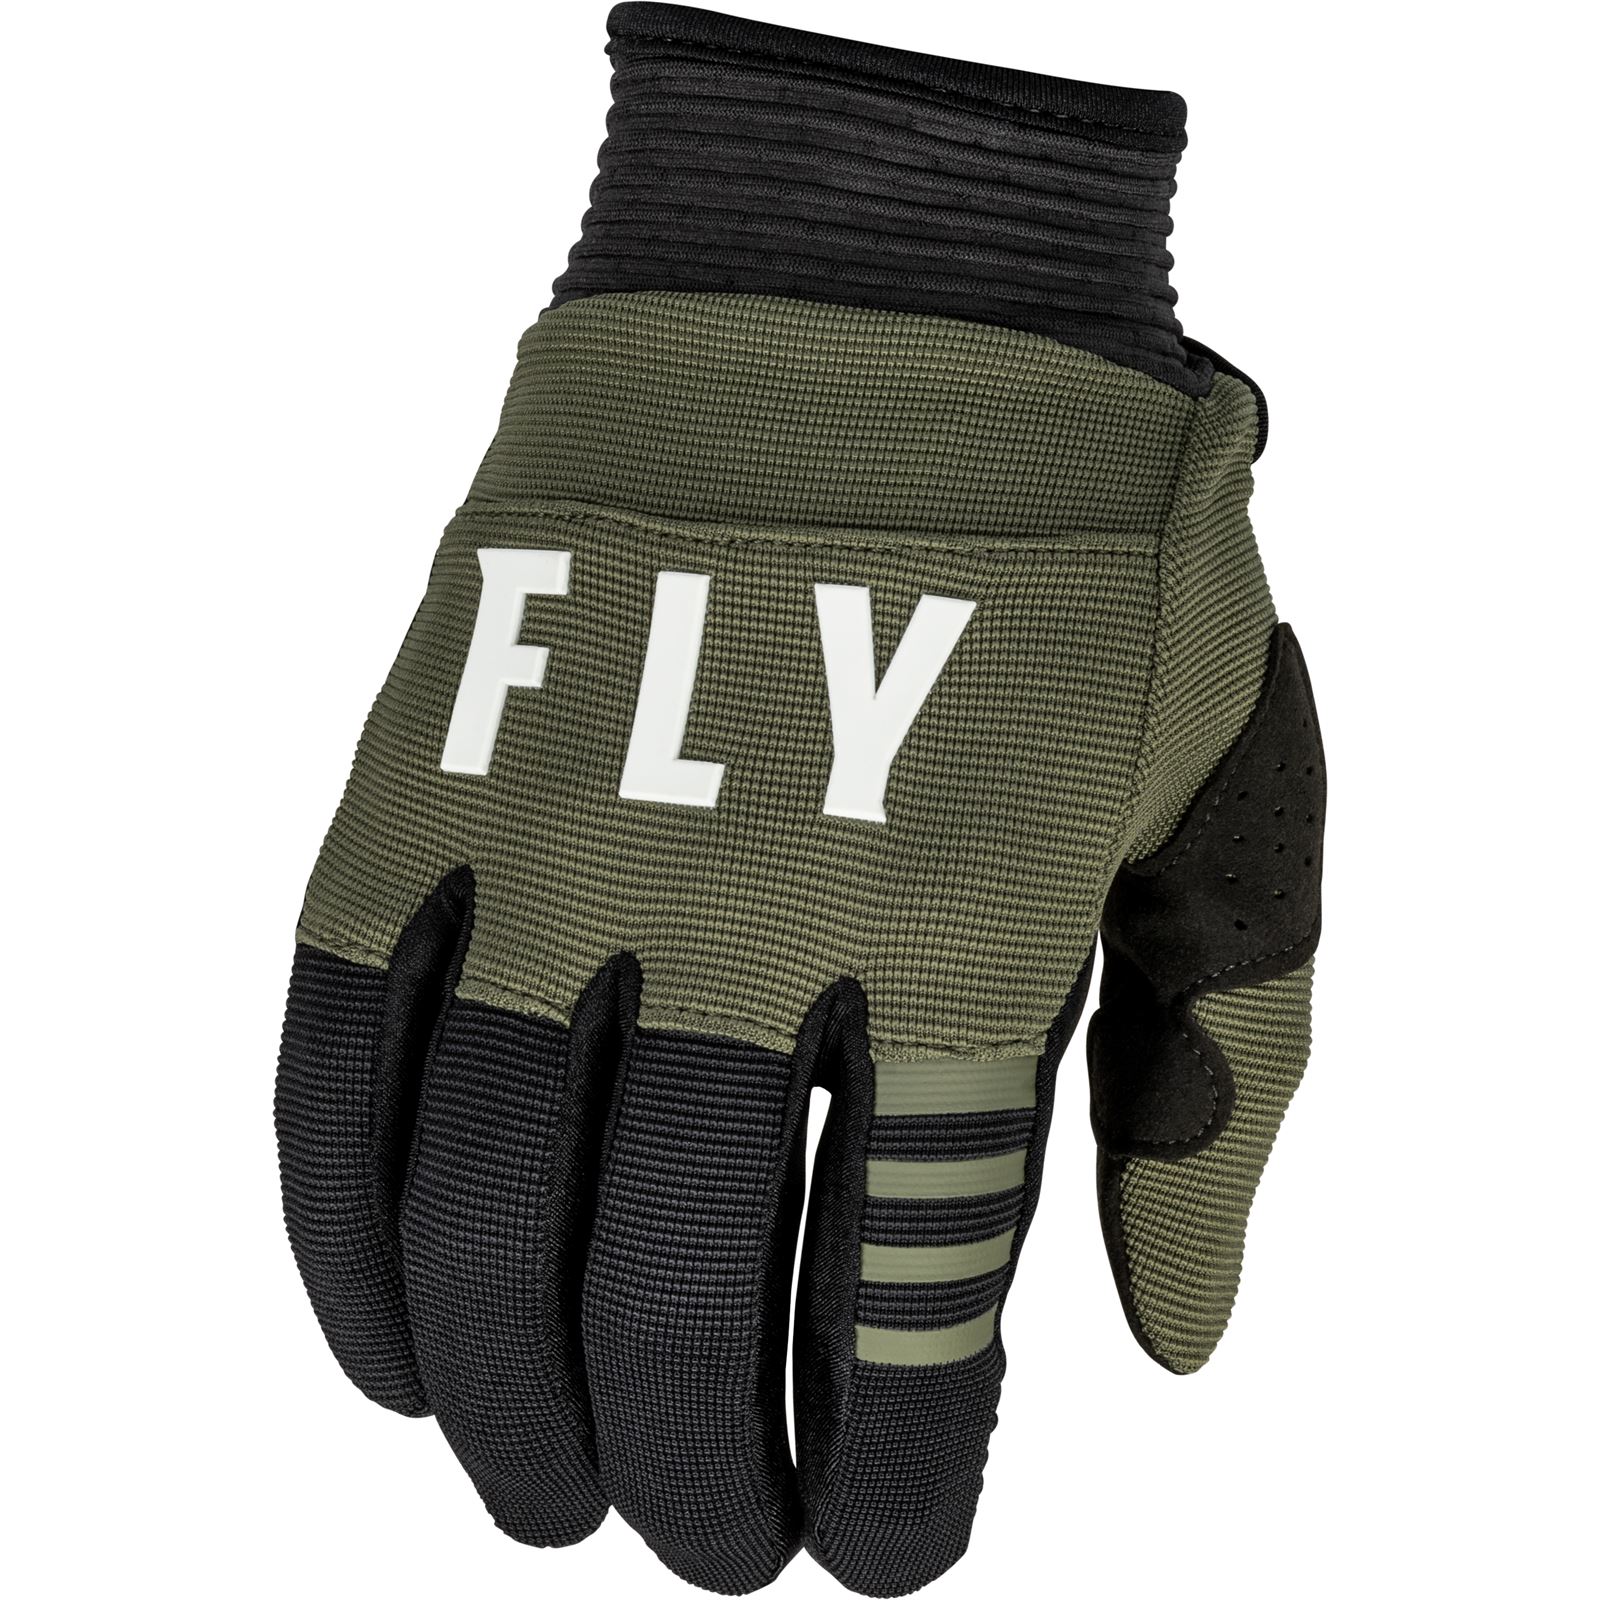 Fly Racing F-16 Gloves - Olive Green/Black - 3XL